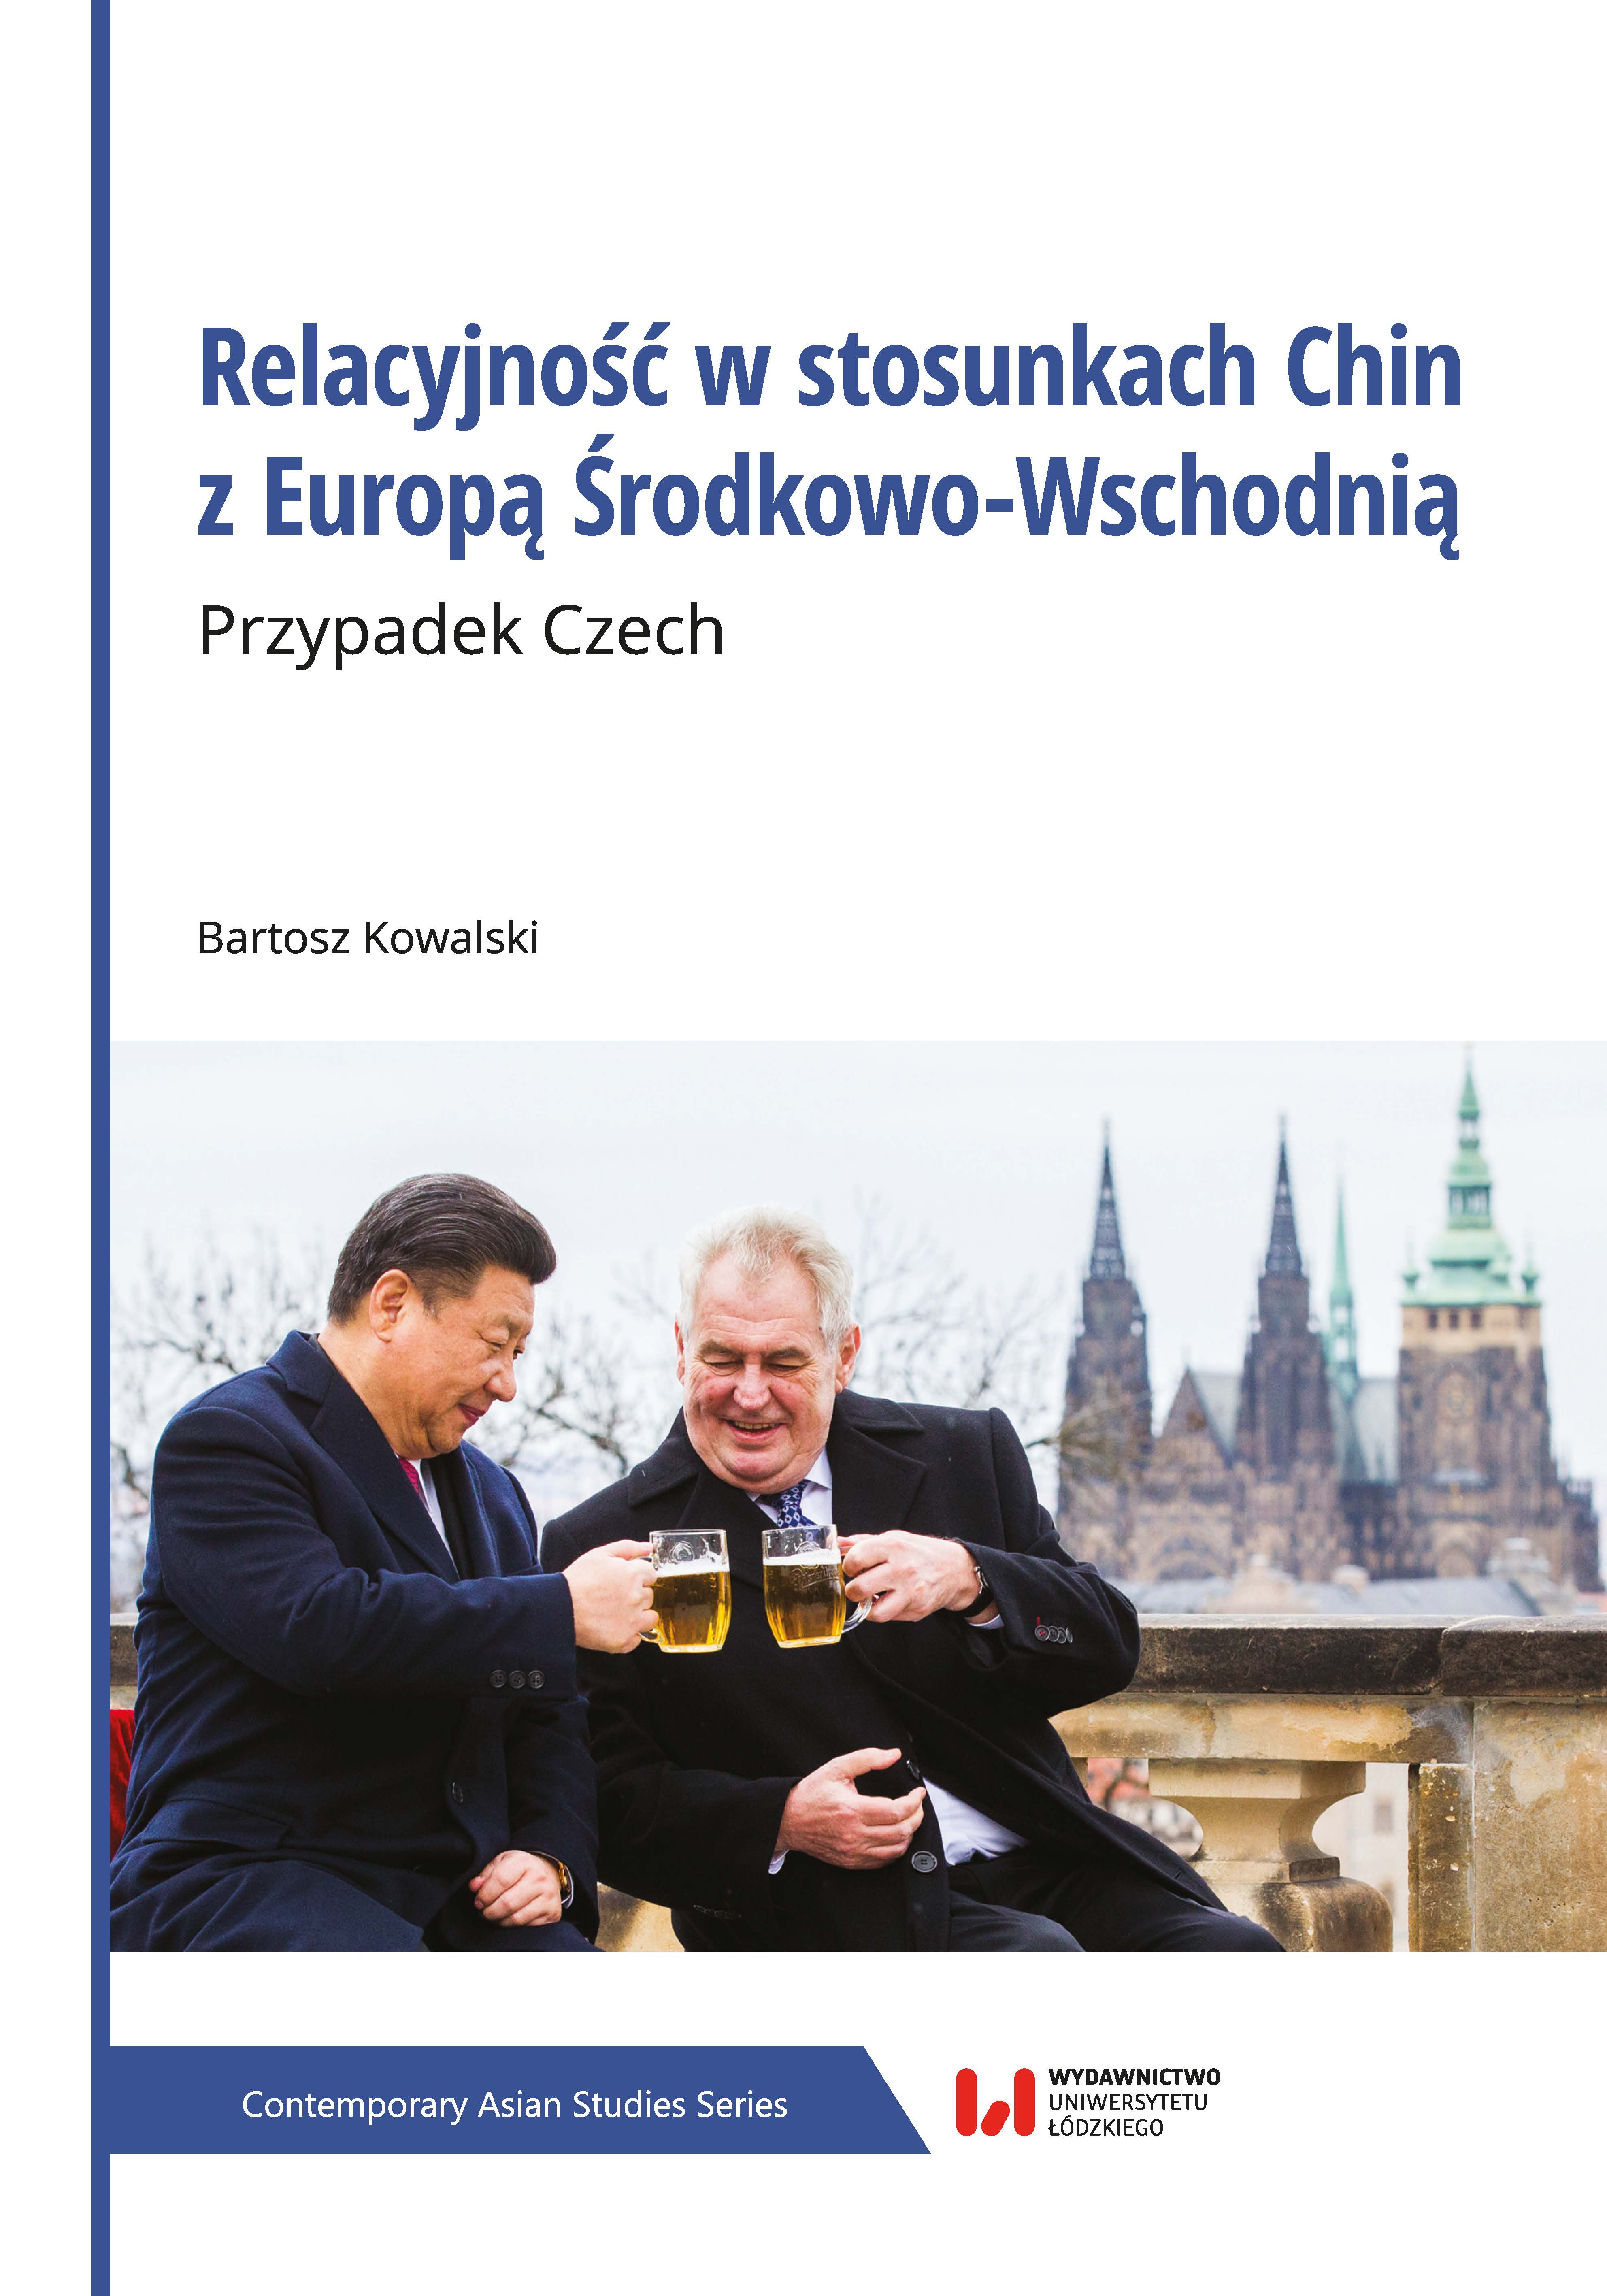 China’s relational politics in Central and Eastern Europe. The case of the Czech Republic